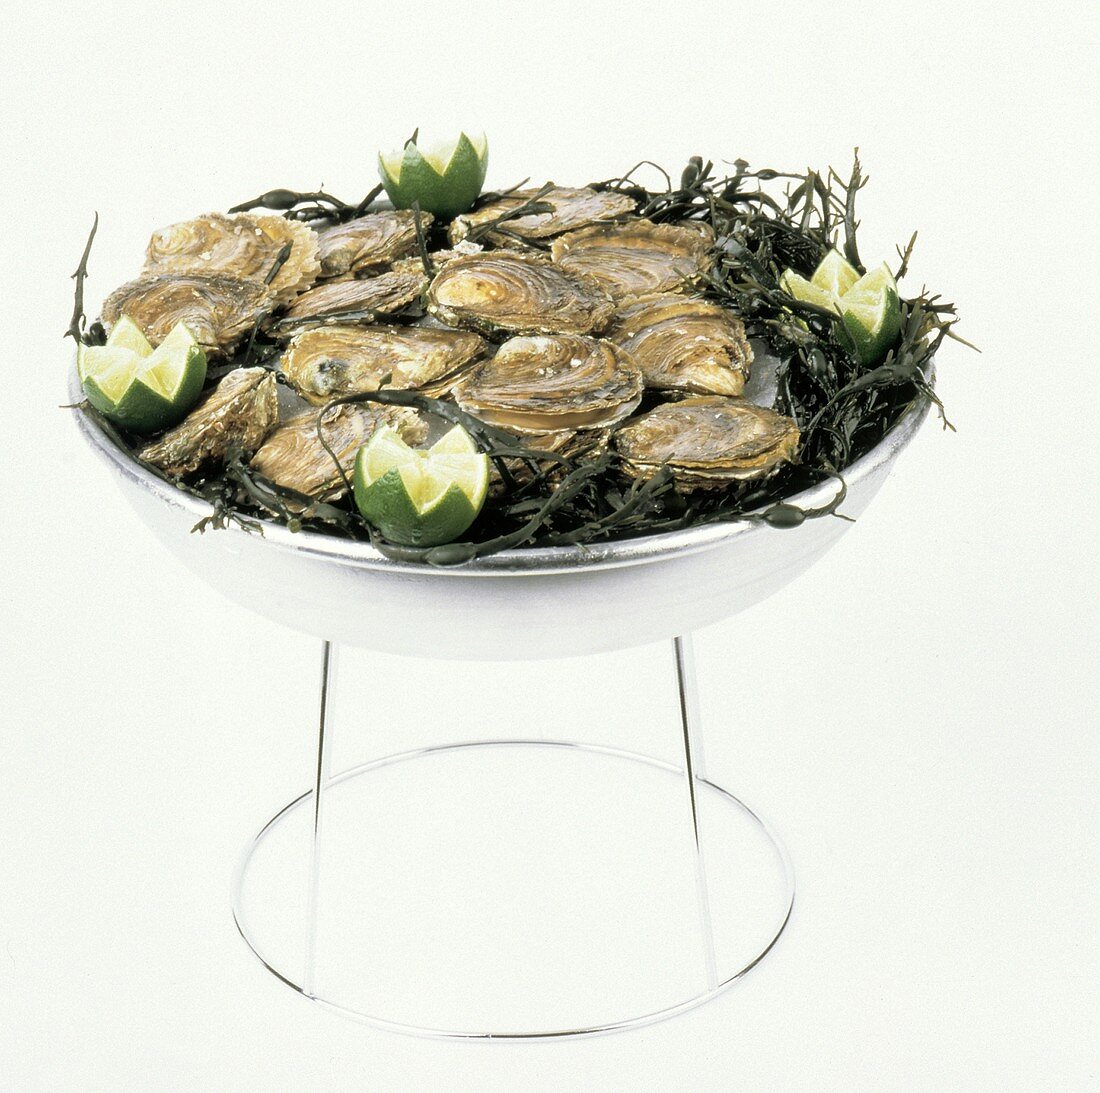 A Bowl of Oysters on Seaweed with Limes